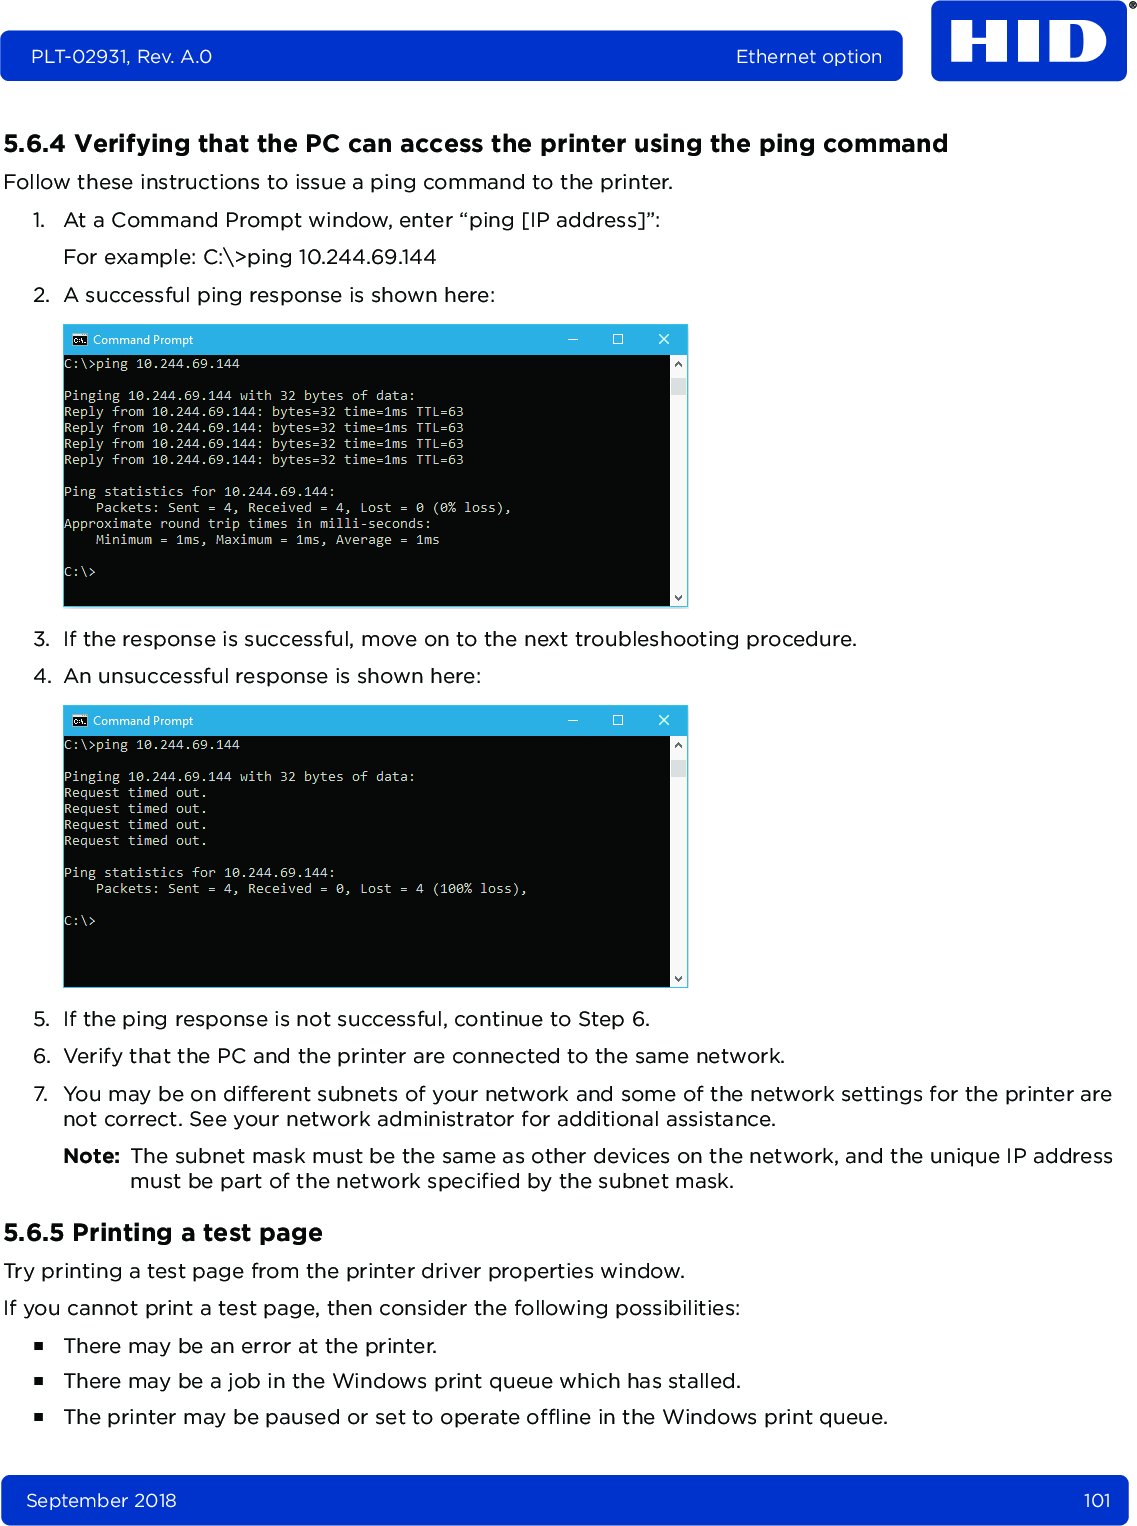 September 2018 101PLT-02931, Rev. A.0 Ethernet option5.6.4 Verifying that the PC can access the printer using the ping commandFollow these instructions to issue a ping command to the printer.1. At a Command Prompt window, enter “ping [IP address]”: For example: C:\&gt;ping 10.244.69.1442. A successful ping response is shown here:3. If the response is successful, move on to the next troubleshooting procedure. 4. An unsuccessful response is shown here:5. If the ping response is not successful, continue to Step 6.6. Verify that the PC and the printer are connected to the same network.7. You may be on different subnets of your network and some of the network settings for the printer are not correct. See your network administrator for additional assistance. Note: The subnet mask must be the same as other devices on the network, and the unique IP address must be part of the network specified by the subnet mask.5.6.5 Printing a test pageTry printing a test page from the printer driver properties window. If you cannot print a test page, then consider the following possibilities:႑There may be an error at the printer.႑There may be a job in the Windows print queue which has stalled.႑The printer may be paused or set to operate offline in the Windows print queue.